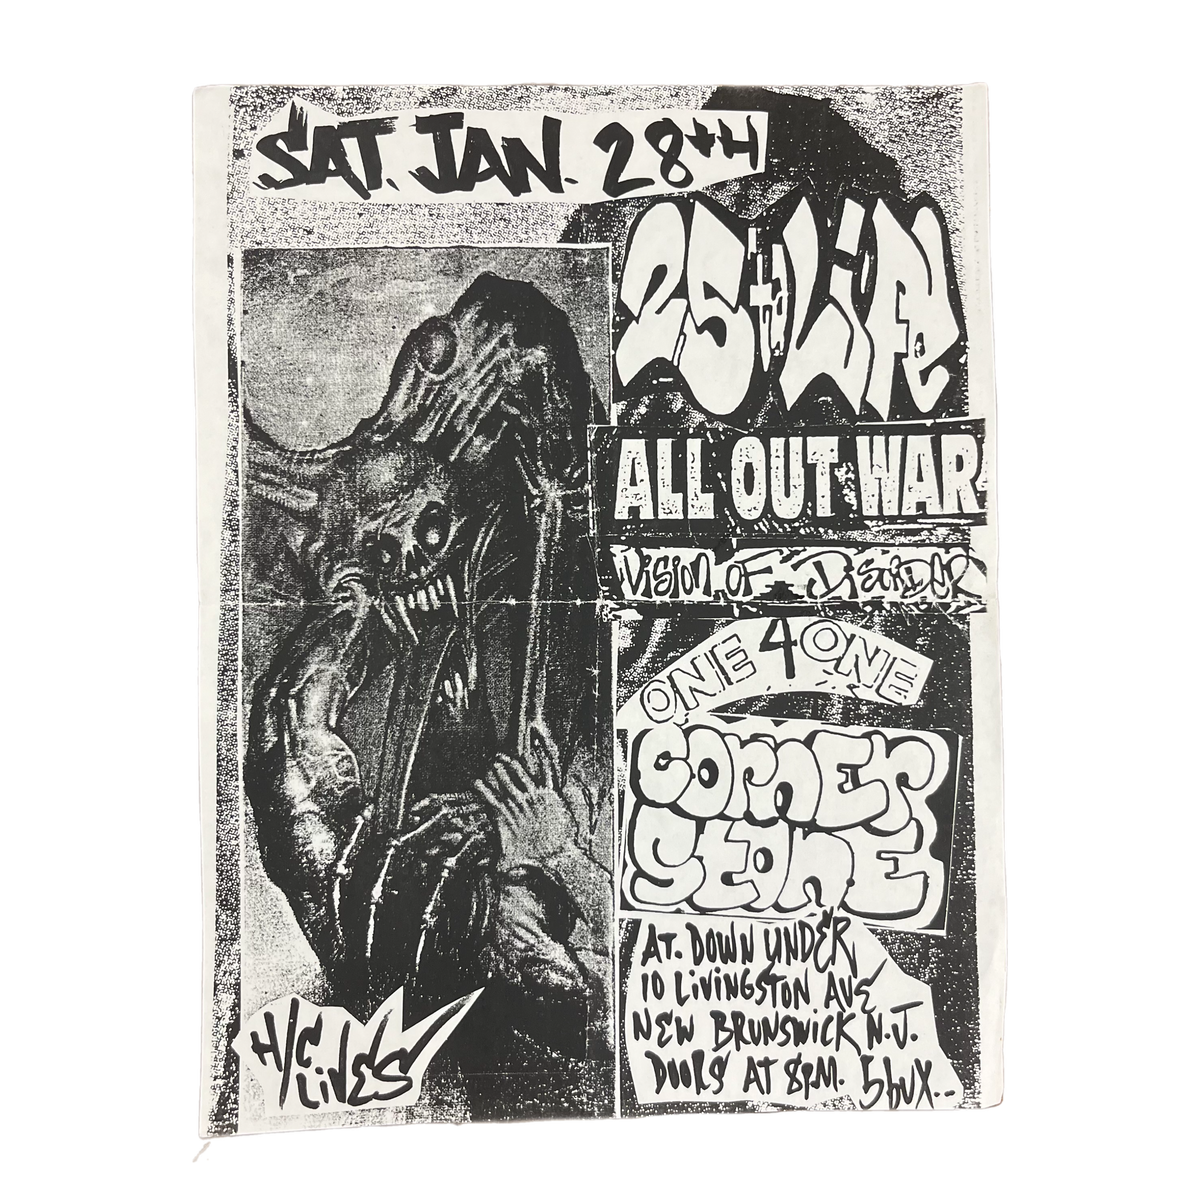 Vintage 25 Ta Life All Out War Vision Of Disorder One 4 One Cornerstone &quot;New Brunswick, NJ&quot; Show Flyer